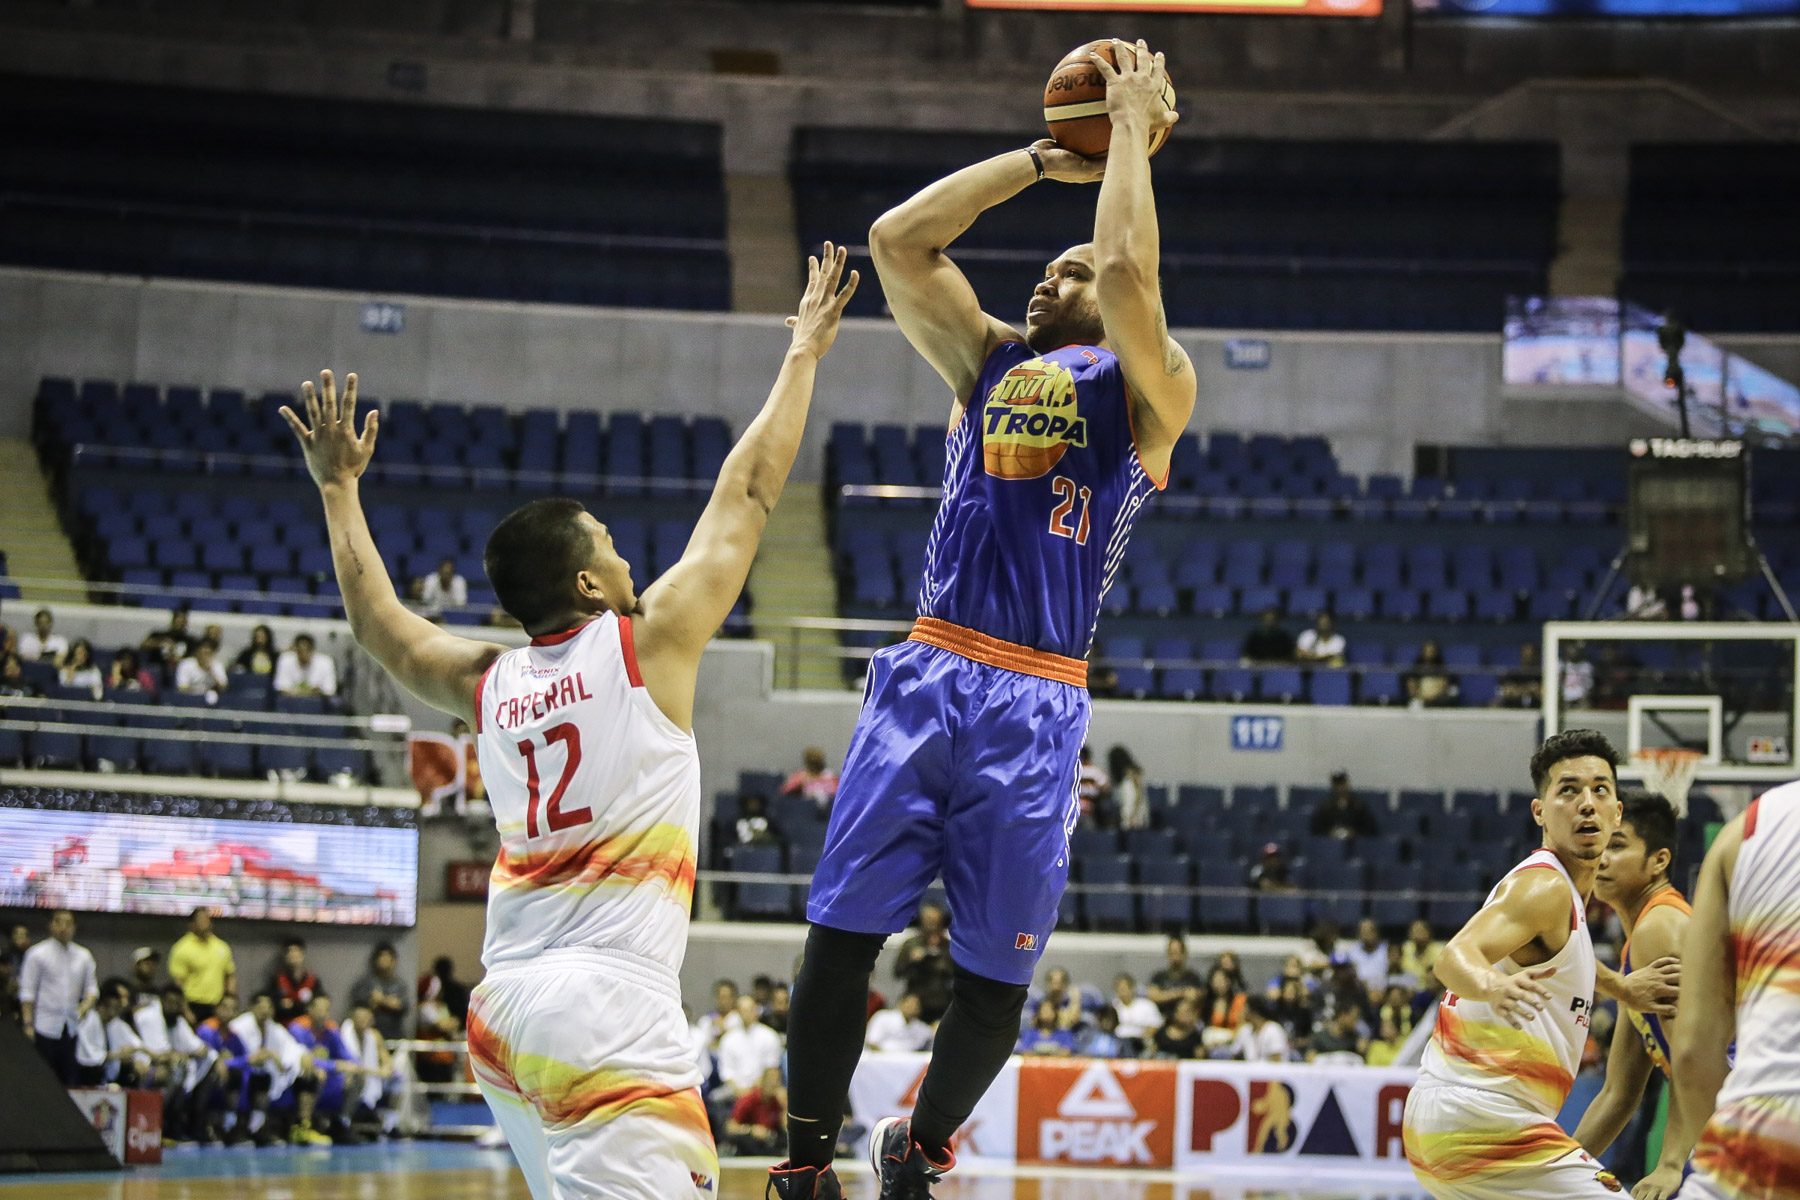 Arrival of Racela, Williams’ hot start not a coincidence